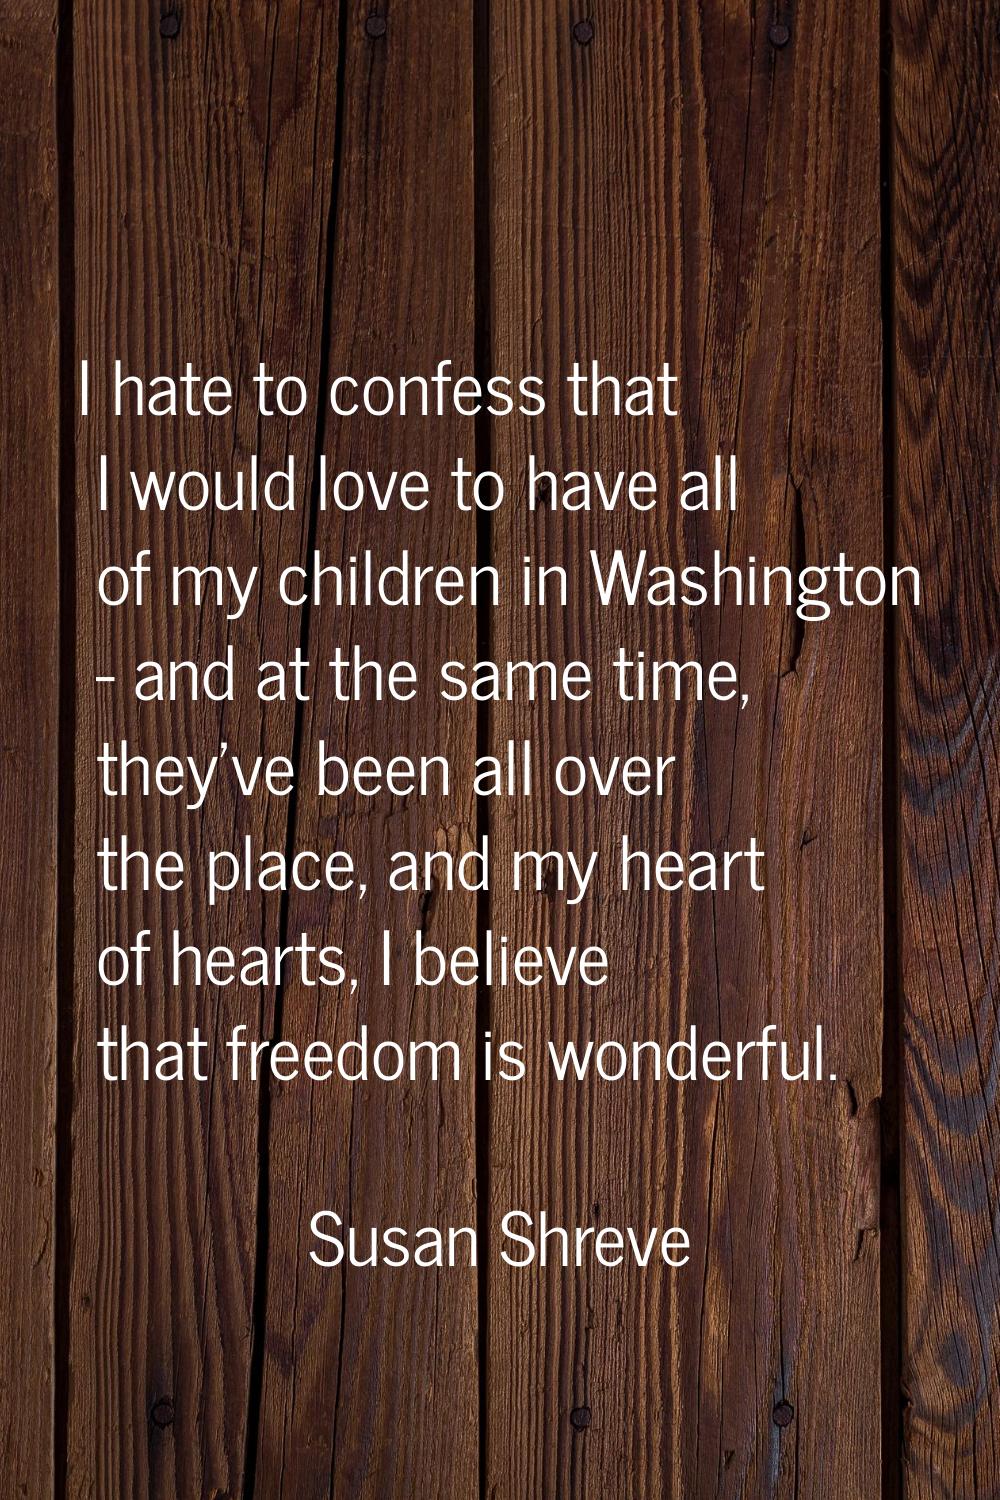 I hate to confess that I would love to have all of my children in Washington - and at the same time